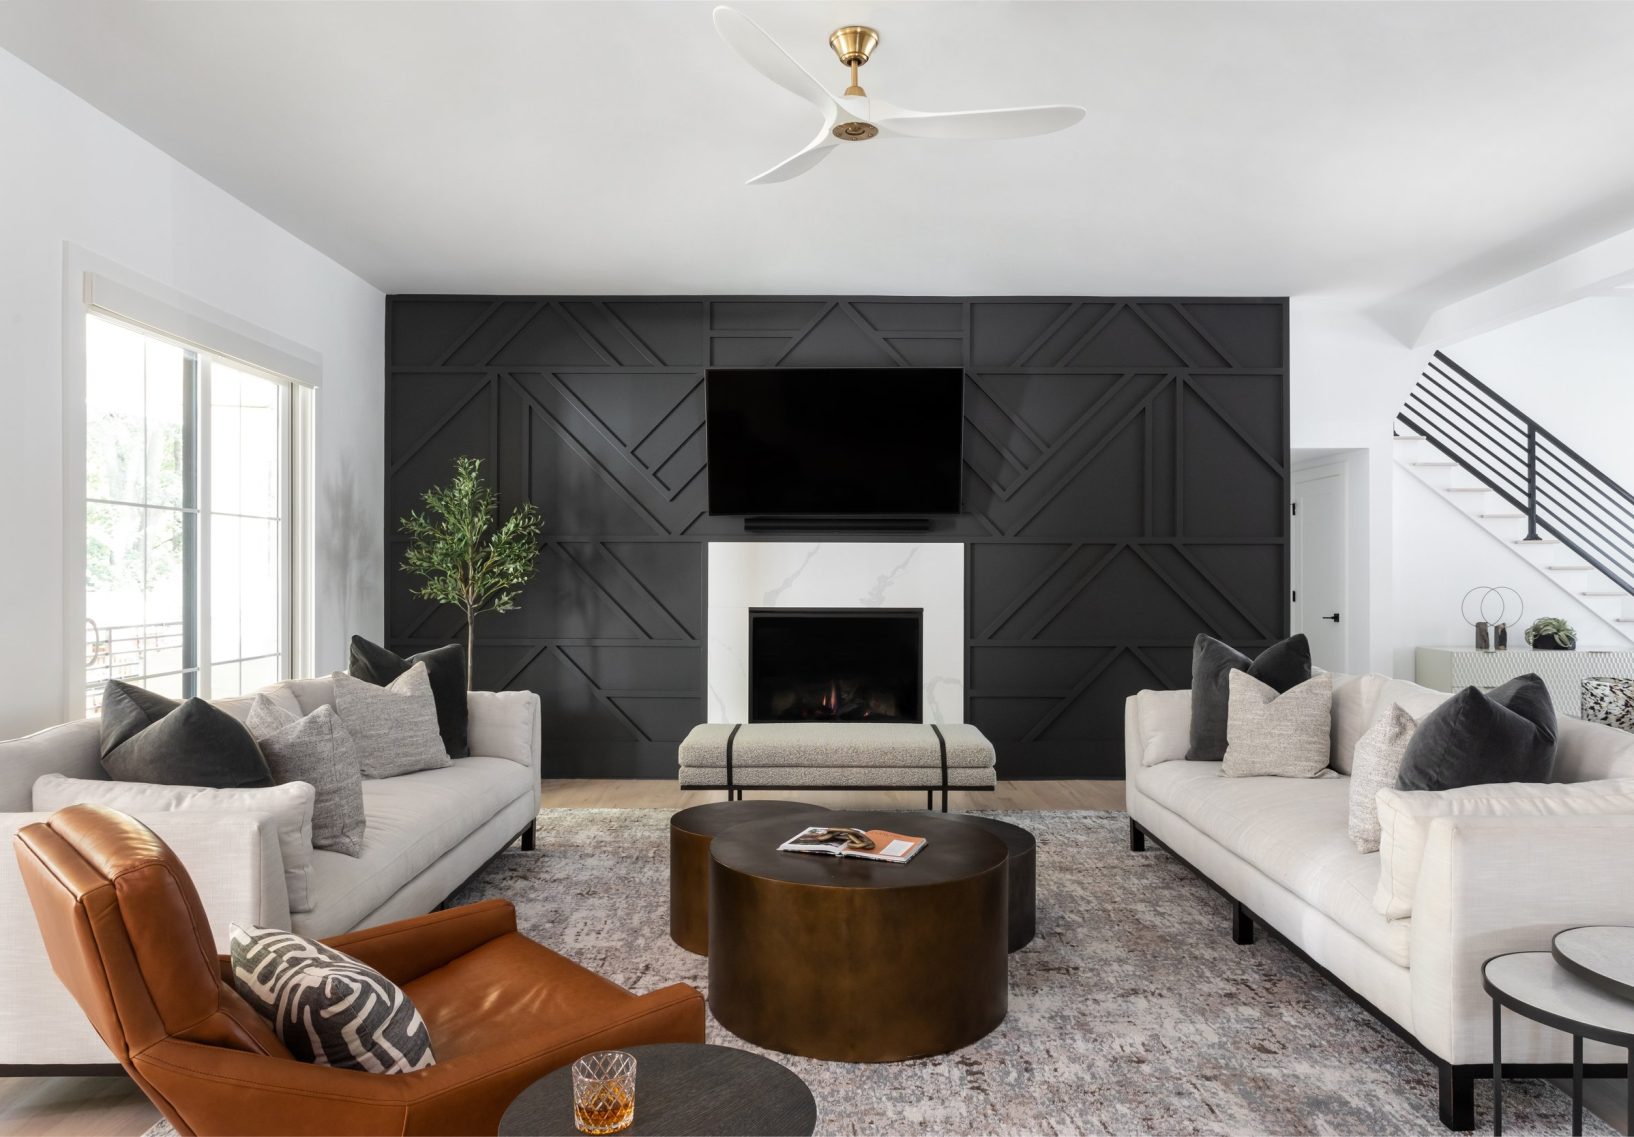 Luxury minimalist living room with black accent wall and leather accents.